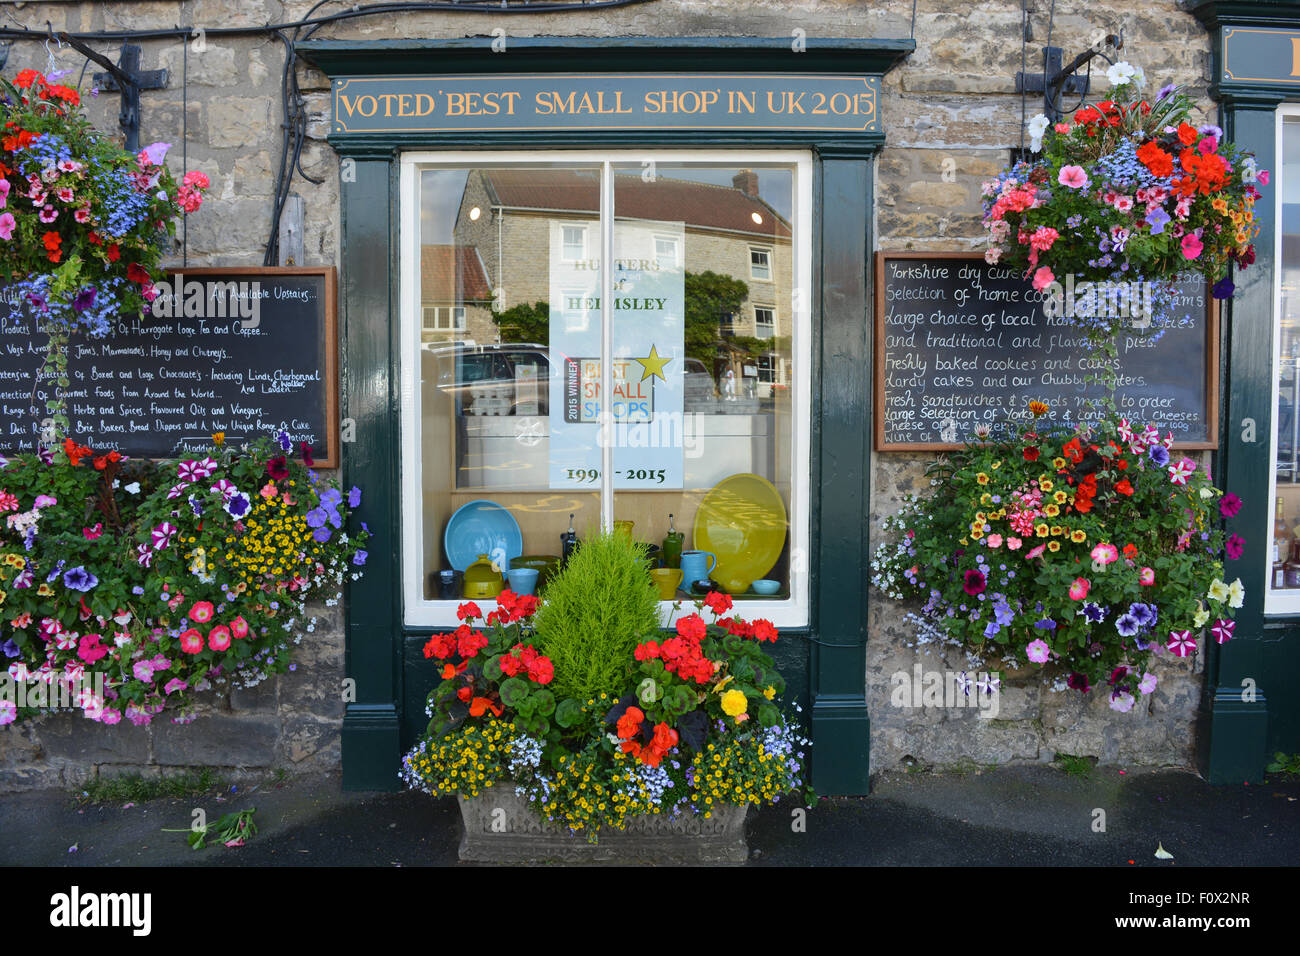 Hunters of Helmsley, Voted Best Small Shop in UK, 2015. Window display and hanging baskets, Helmsley, North Yorkshire, England Stock Photo